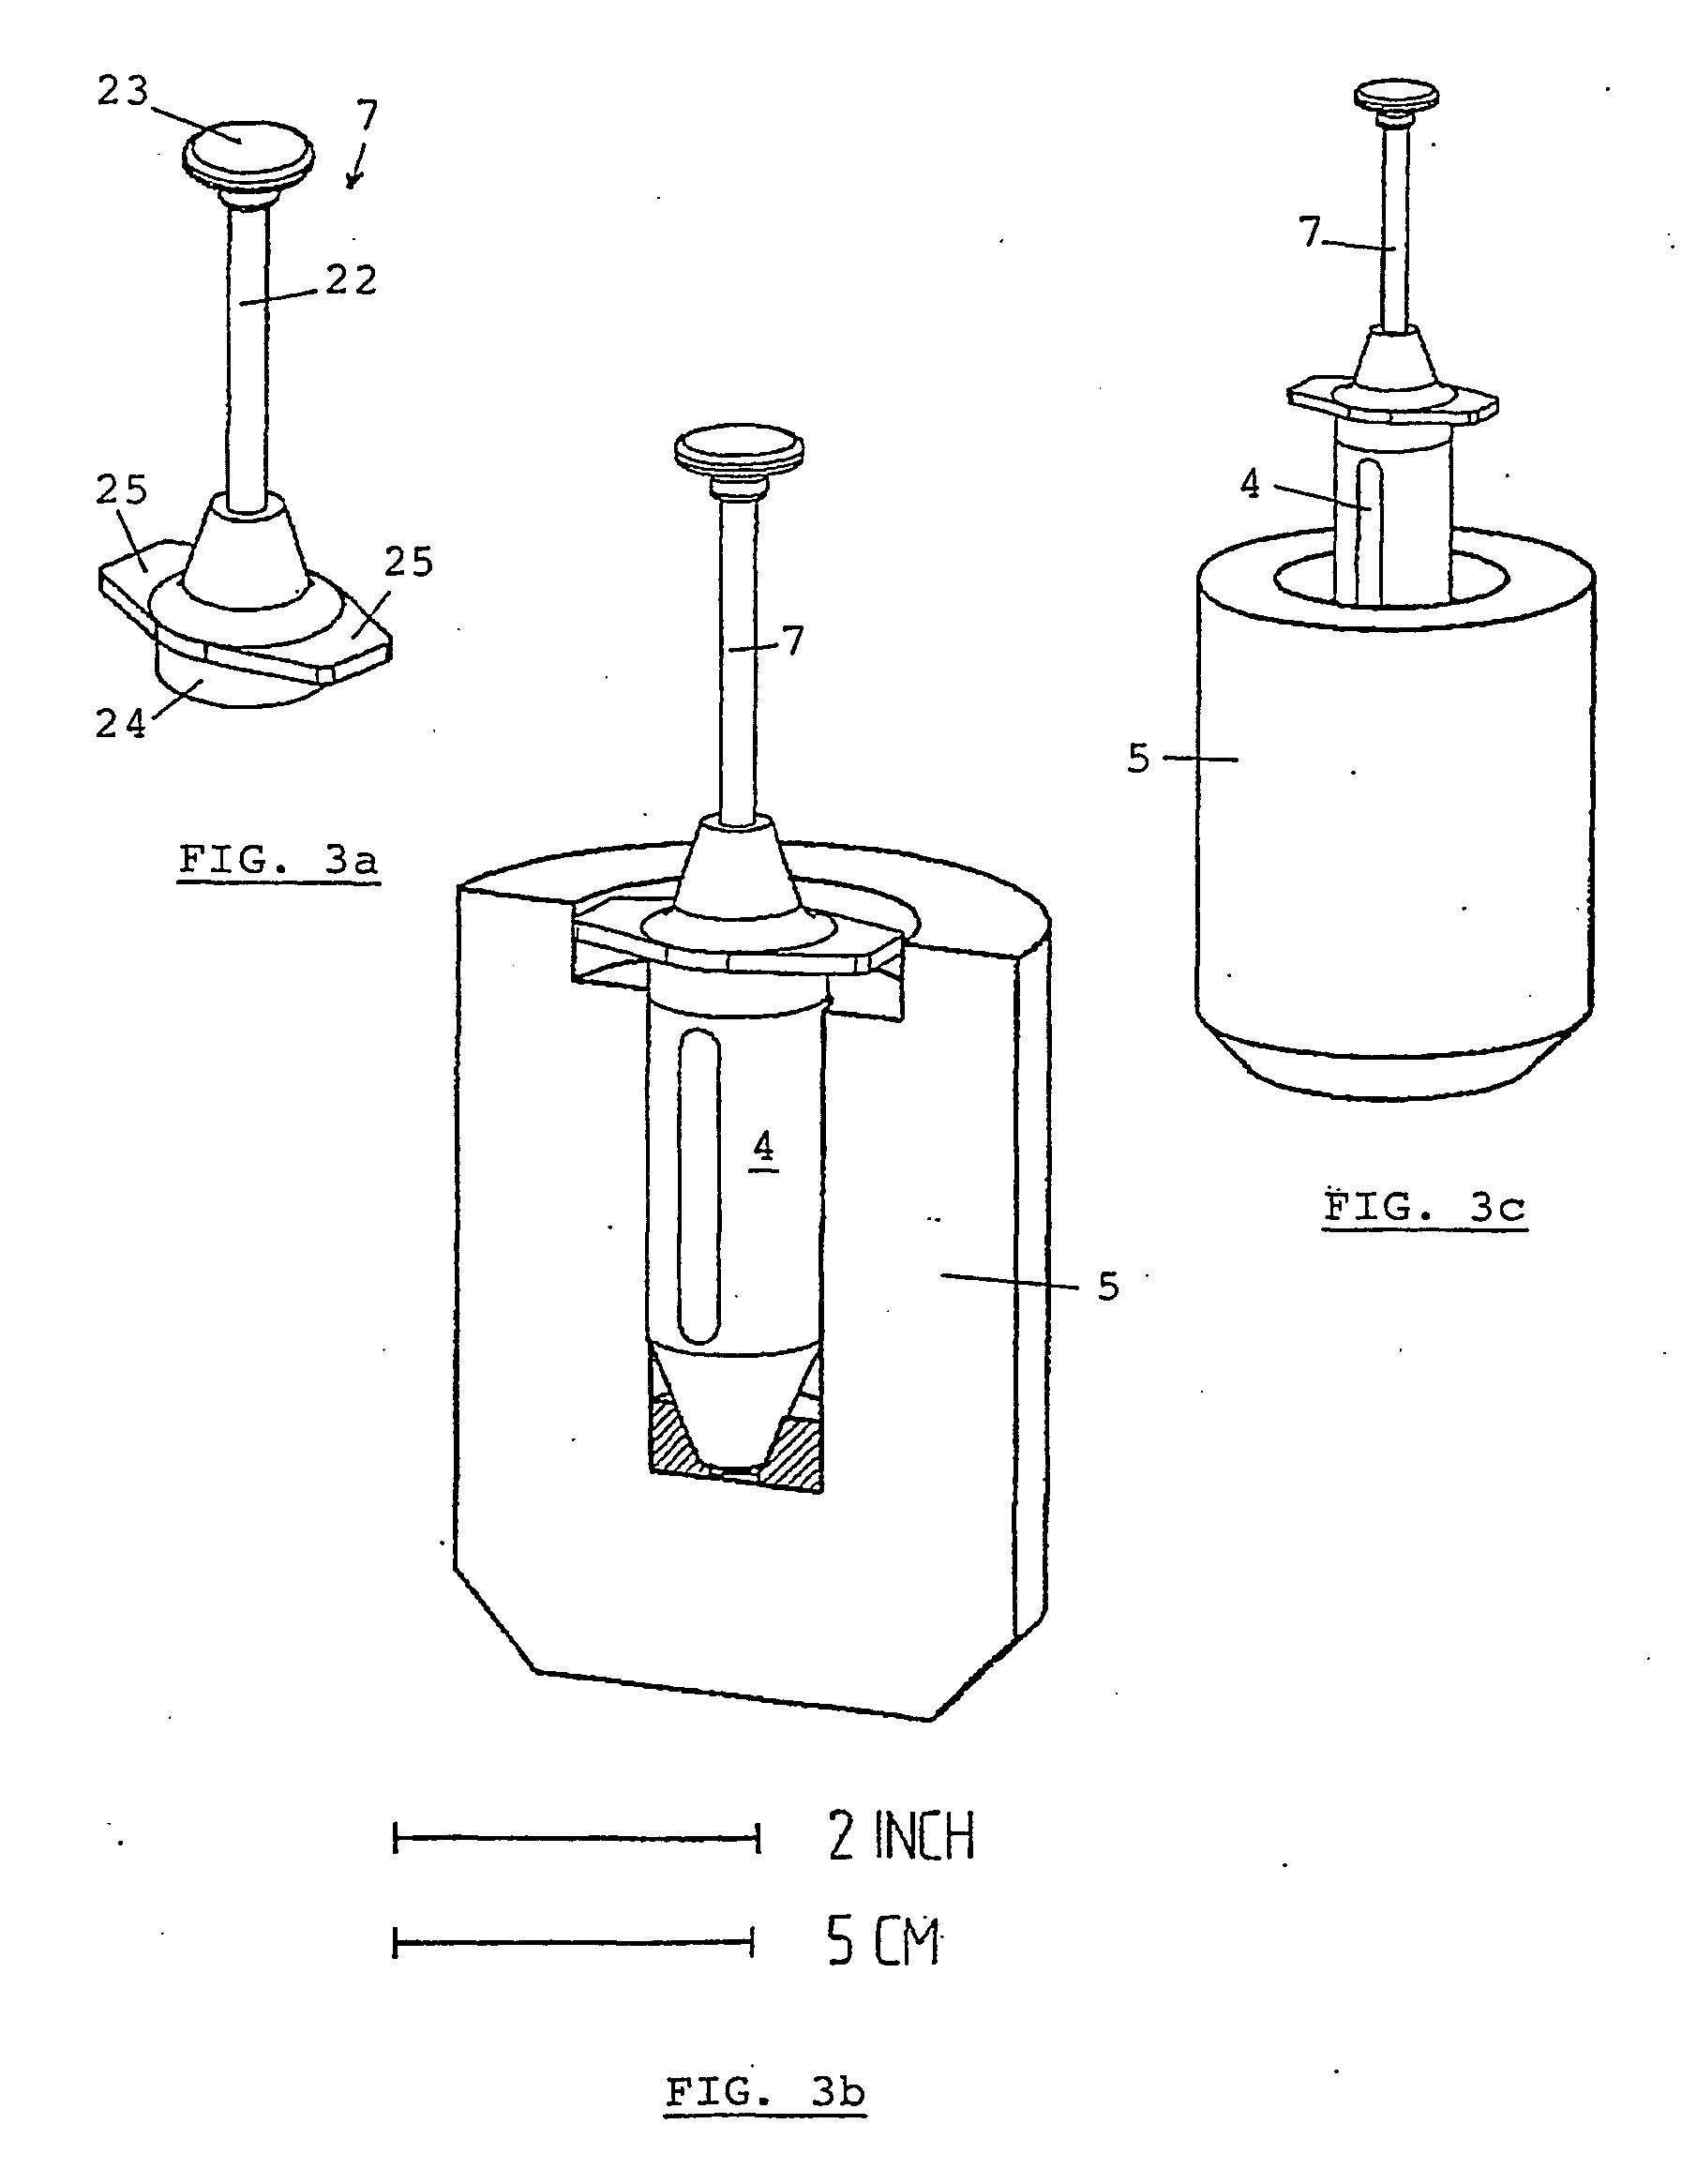 Process and device for preparing radiopharmaceutical products for injection